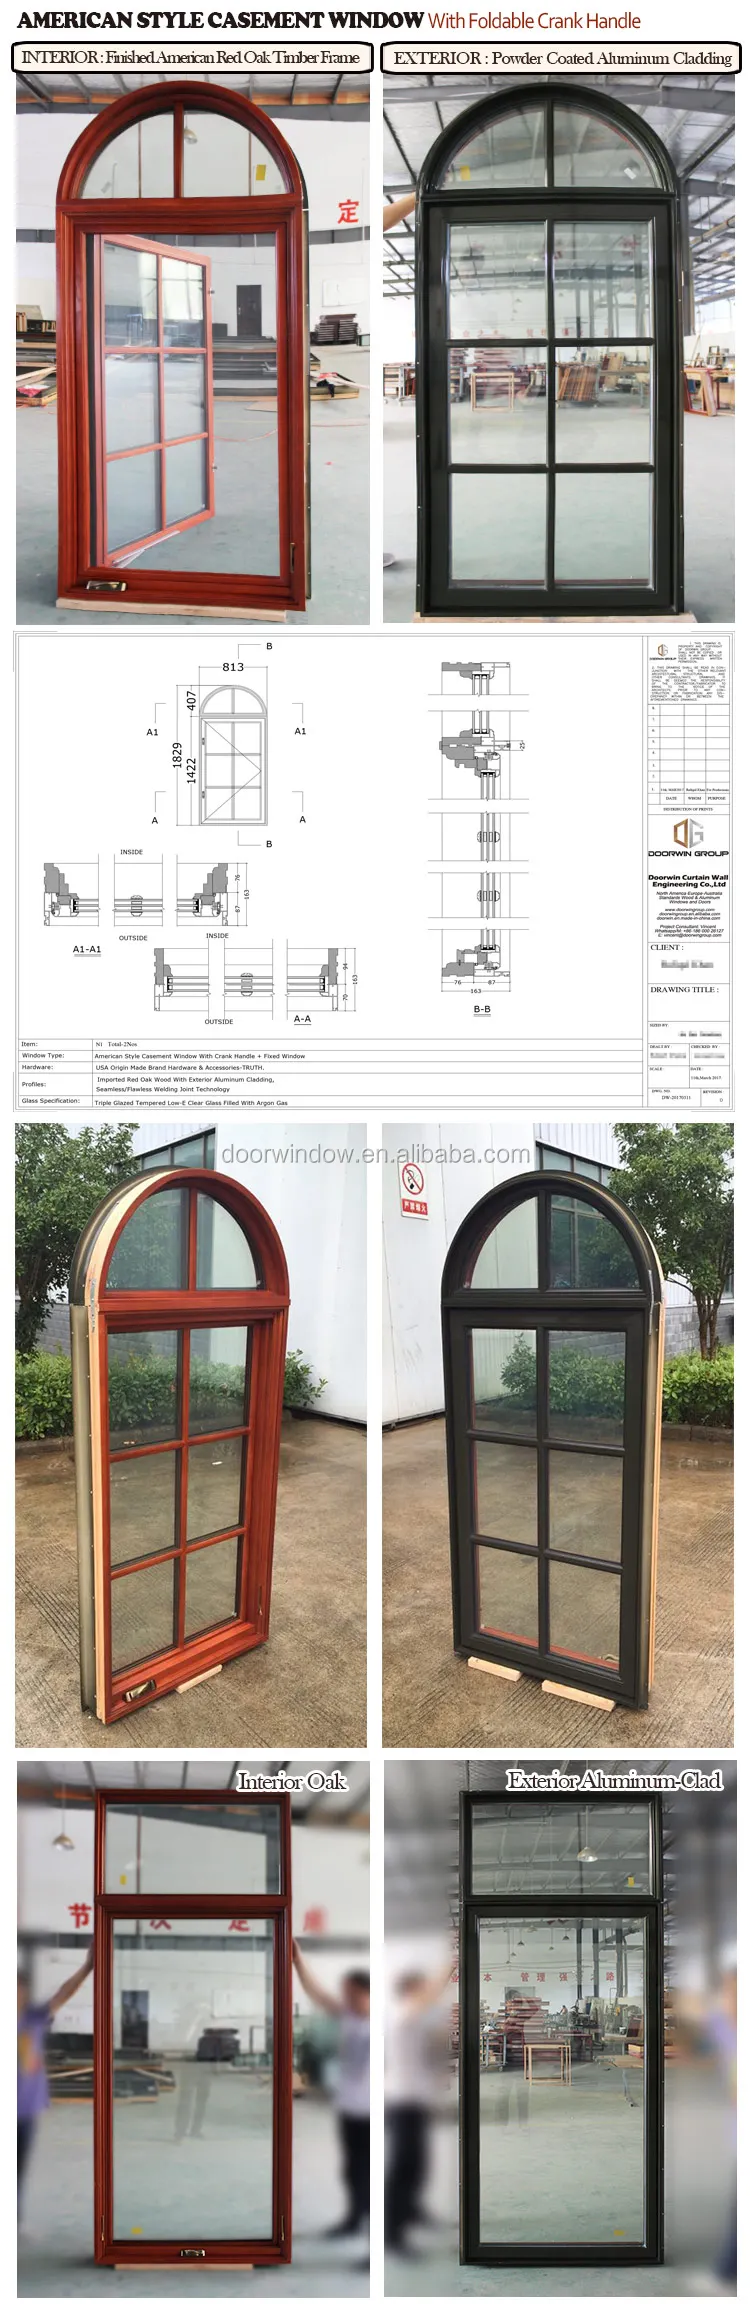 American certified double glazing fixed and awning hand crank window